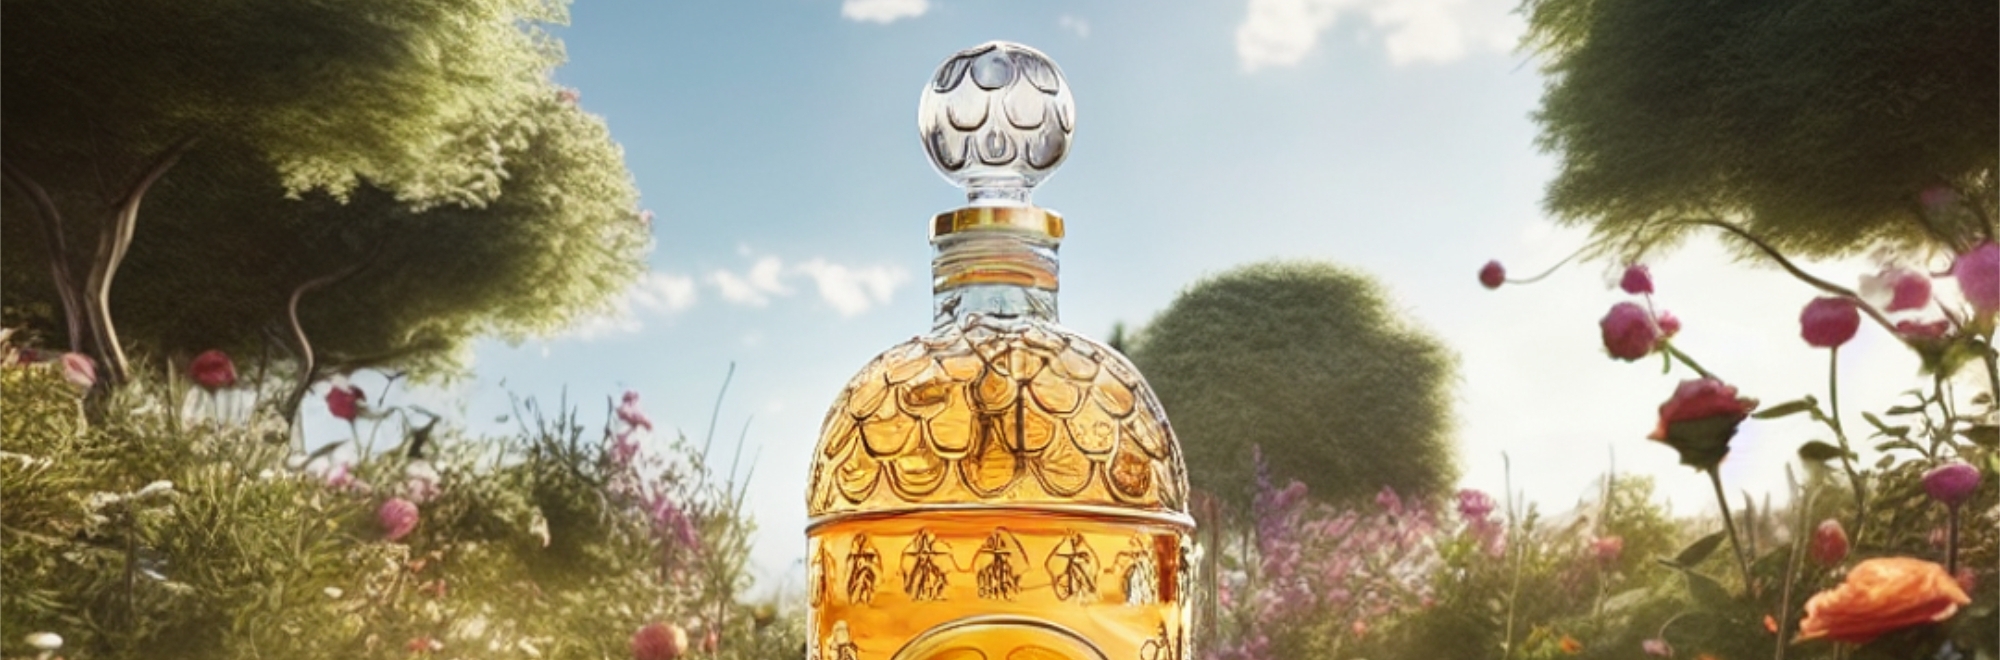 Guerlain combines heritage, science fiction and AI to celebrate the 170th anniversary of its Bee Bottle